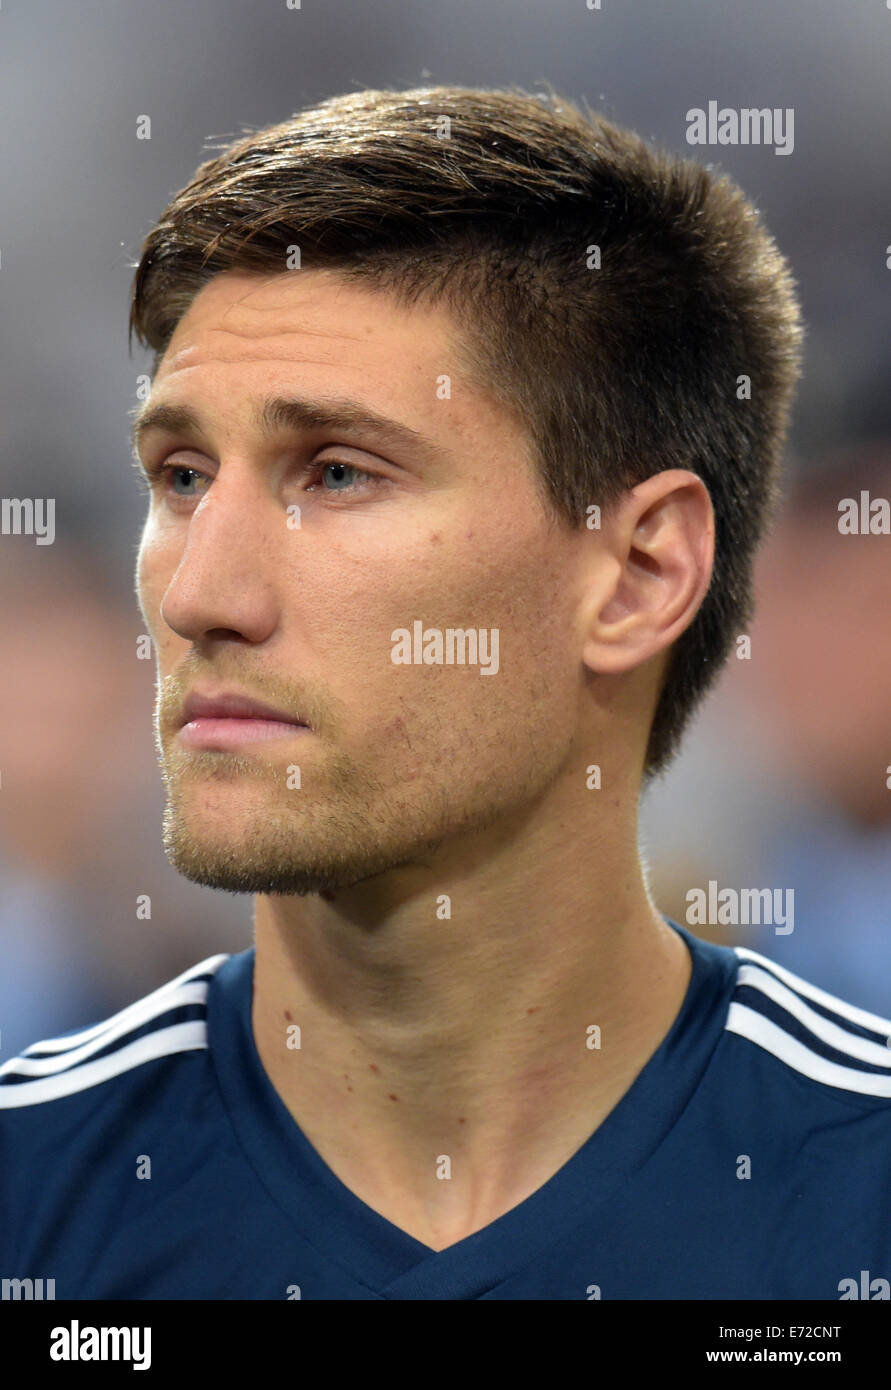 Duesseldorf, Germany. 03rd Sep, 2014. Argentina's Federico Fernandez during the international match between Germany and Argentina at Esprit Arena in Duesseldorf, Germany, 03 September 2014. Photo: BERND THISSEN/dpa/Alamy Live News Stock Photo